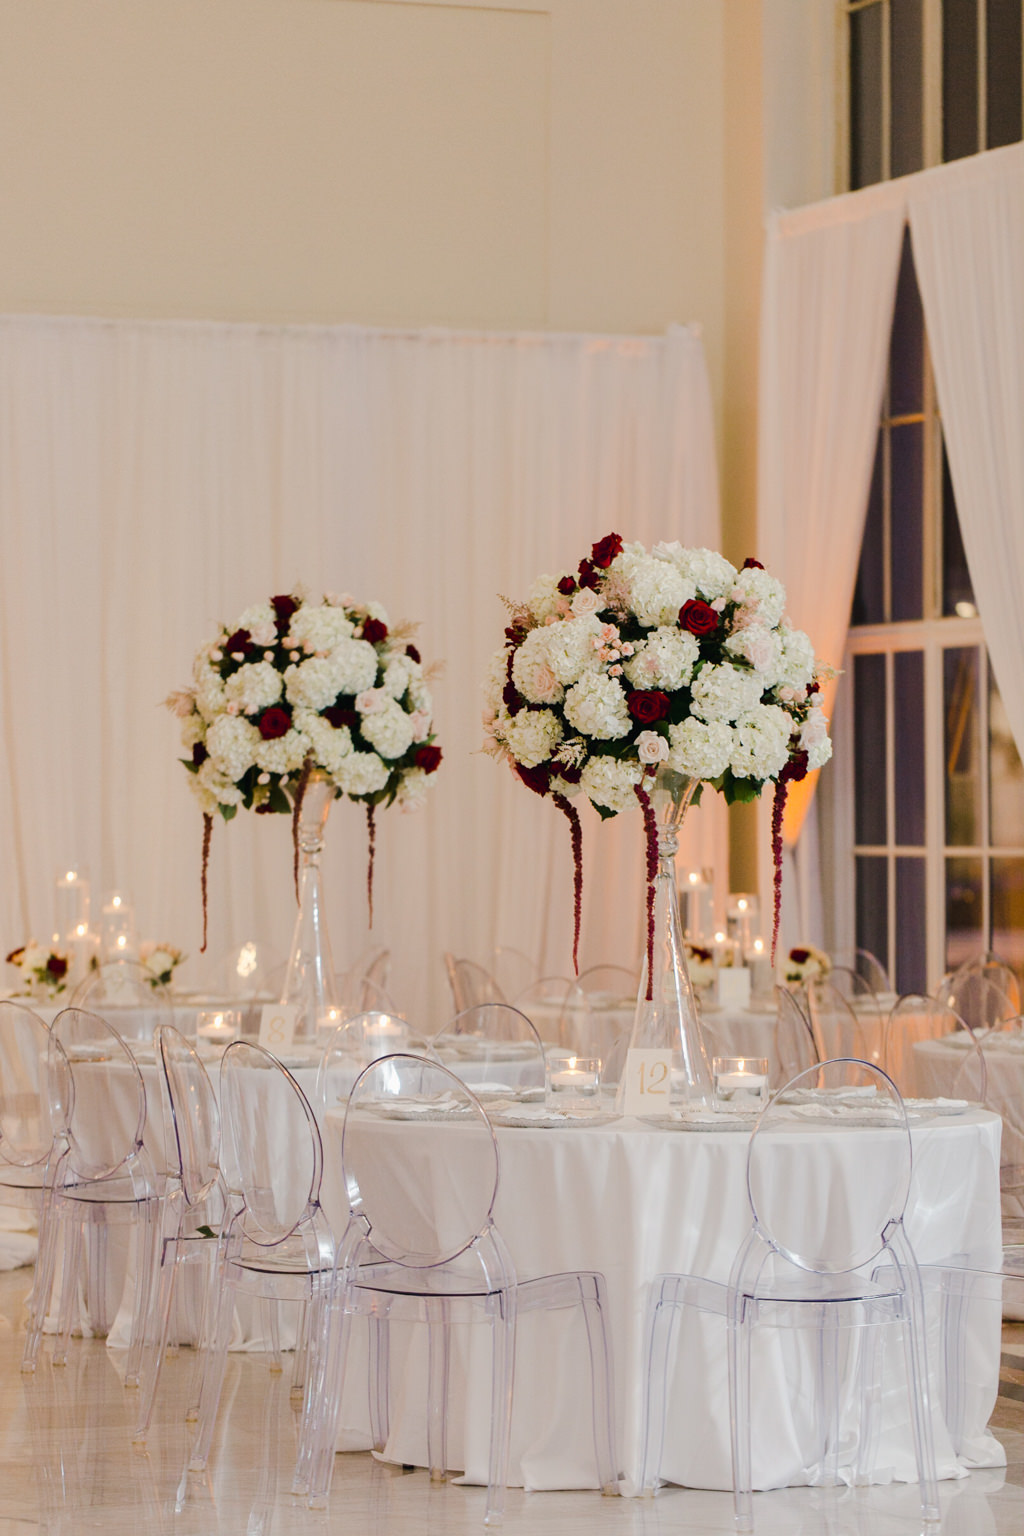 Elegant Wedding Reception Decor, Round Tables with White Tablecloths, Acrylic Ghost Chairs, Tall Glass Vase with White and Blush Pink Hydrangeas with Dark Red Hanging Amaranthus | Tampa Bay Wedding Venue The Vault | Wedding Florist and Rentals Gabro Event Services